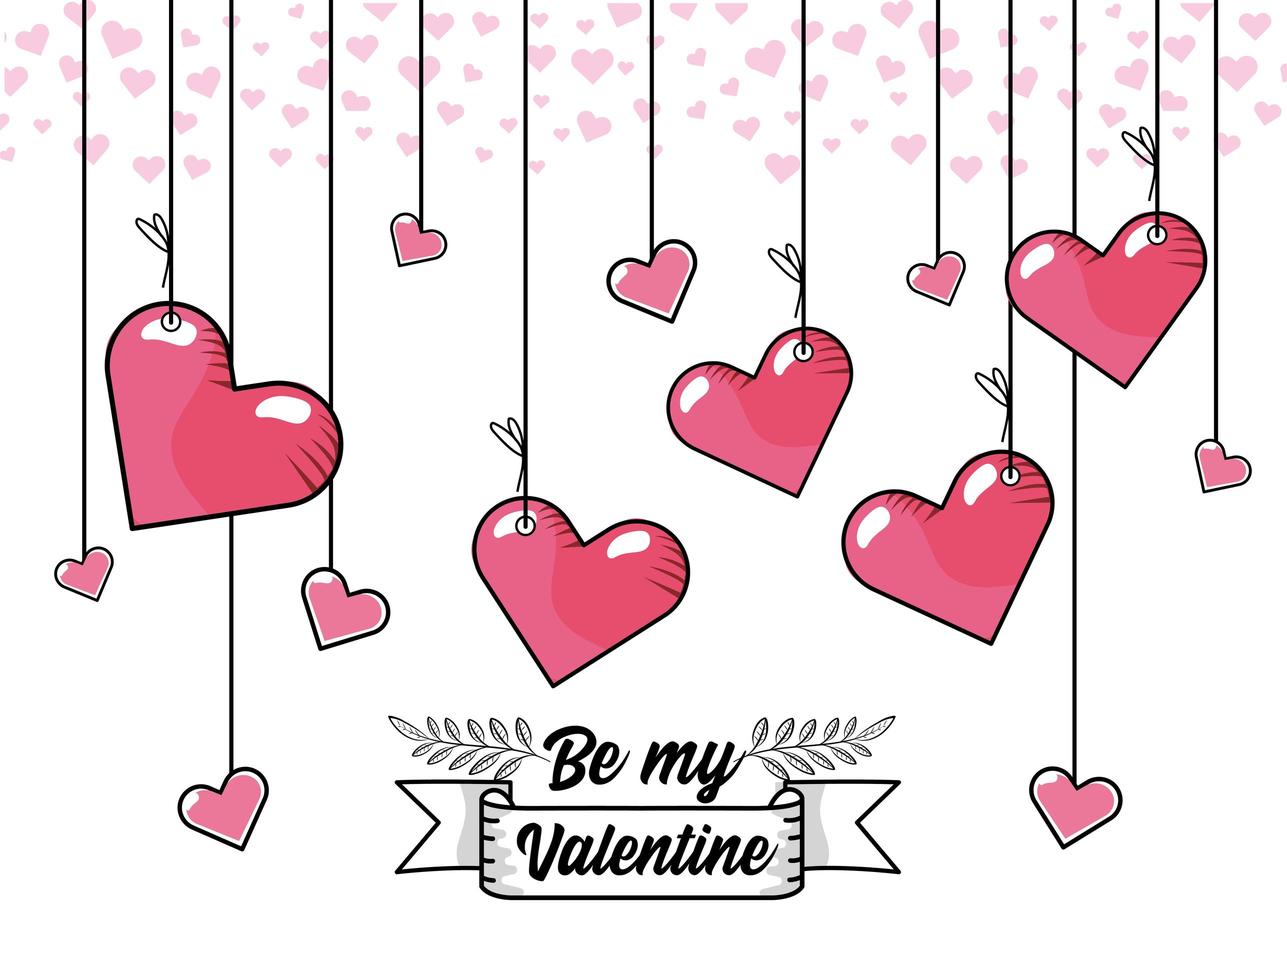 Valentines day hanging hearts design vector